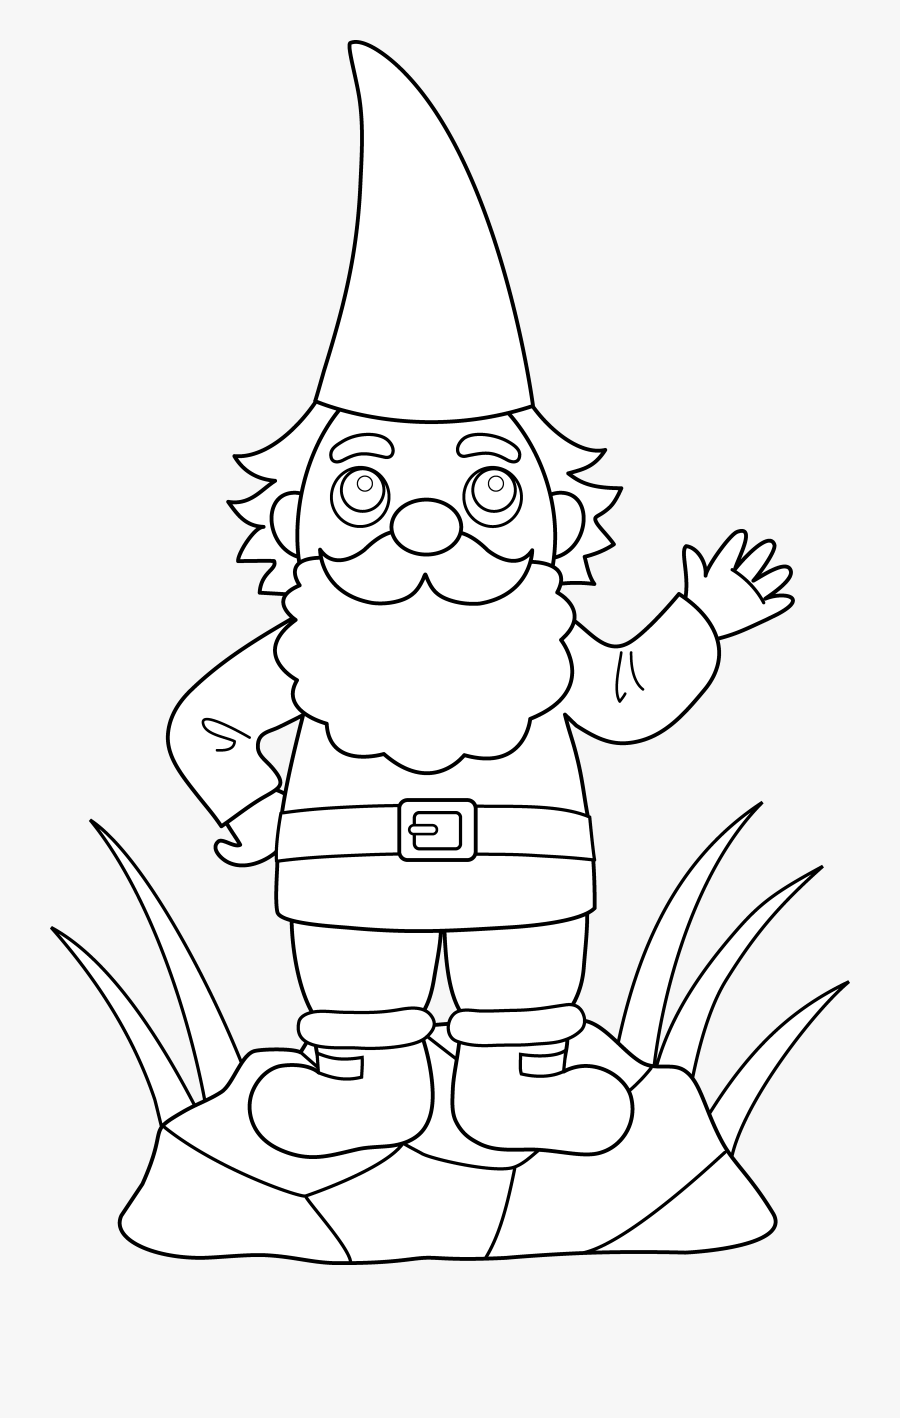 Gnome Clipart Garden Coloring Page, Printable Gnome - Coloring Book, Transparent Clipart